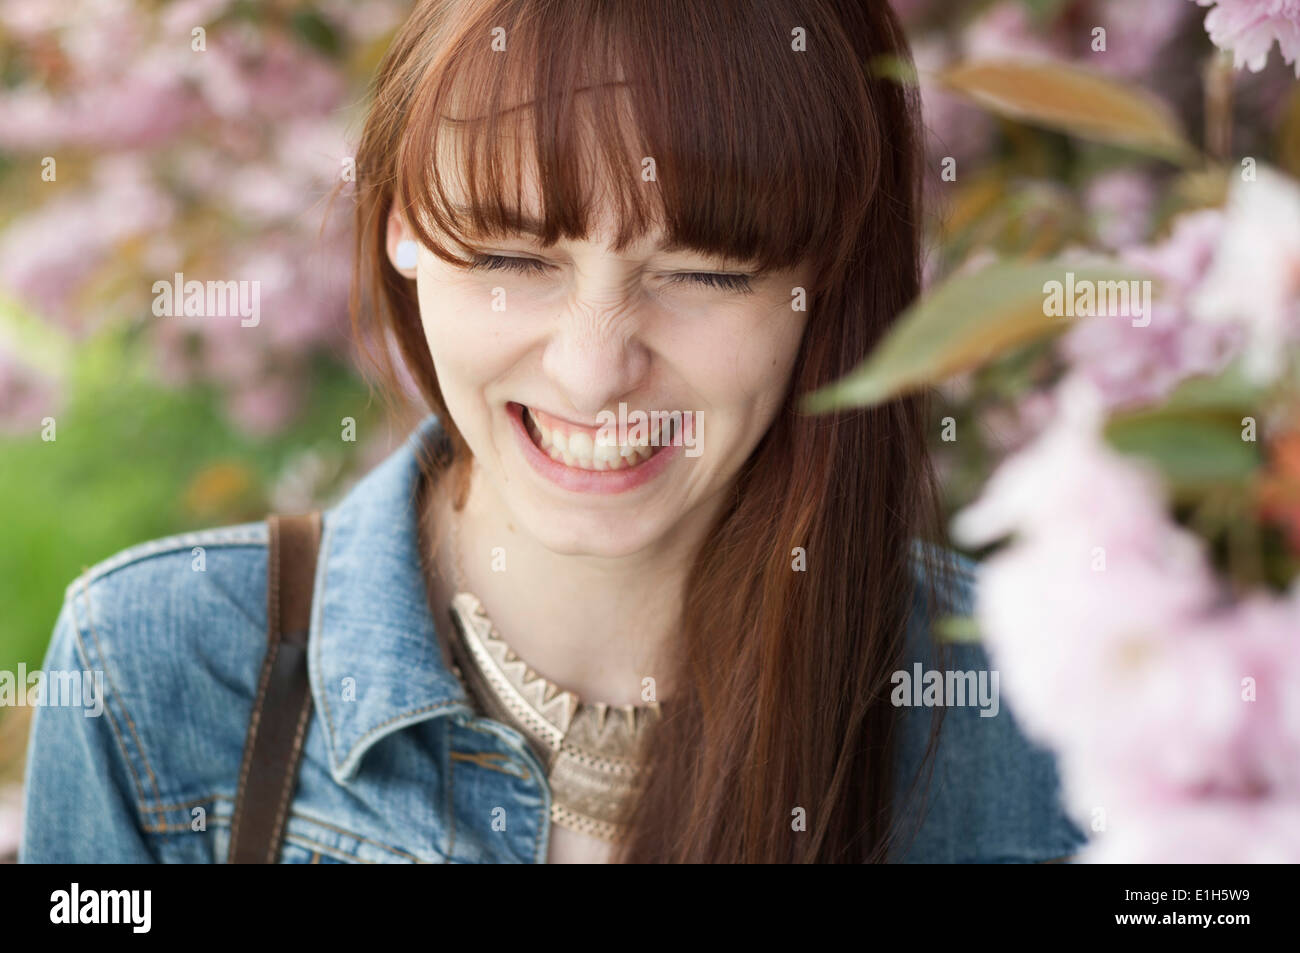 Close up portrait of young woman smiling with eyes closed Stock Photo